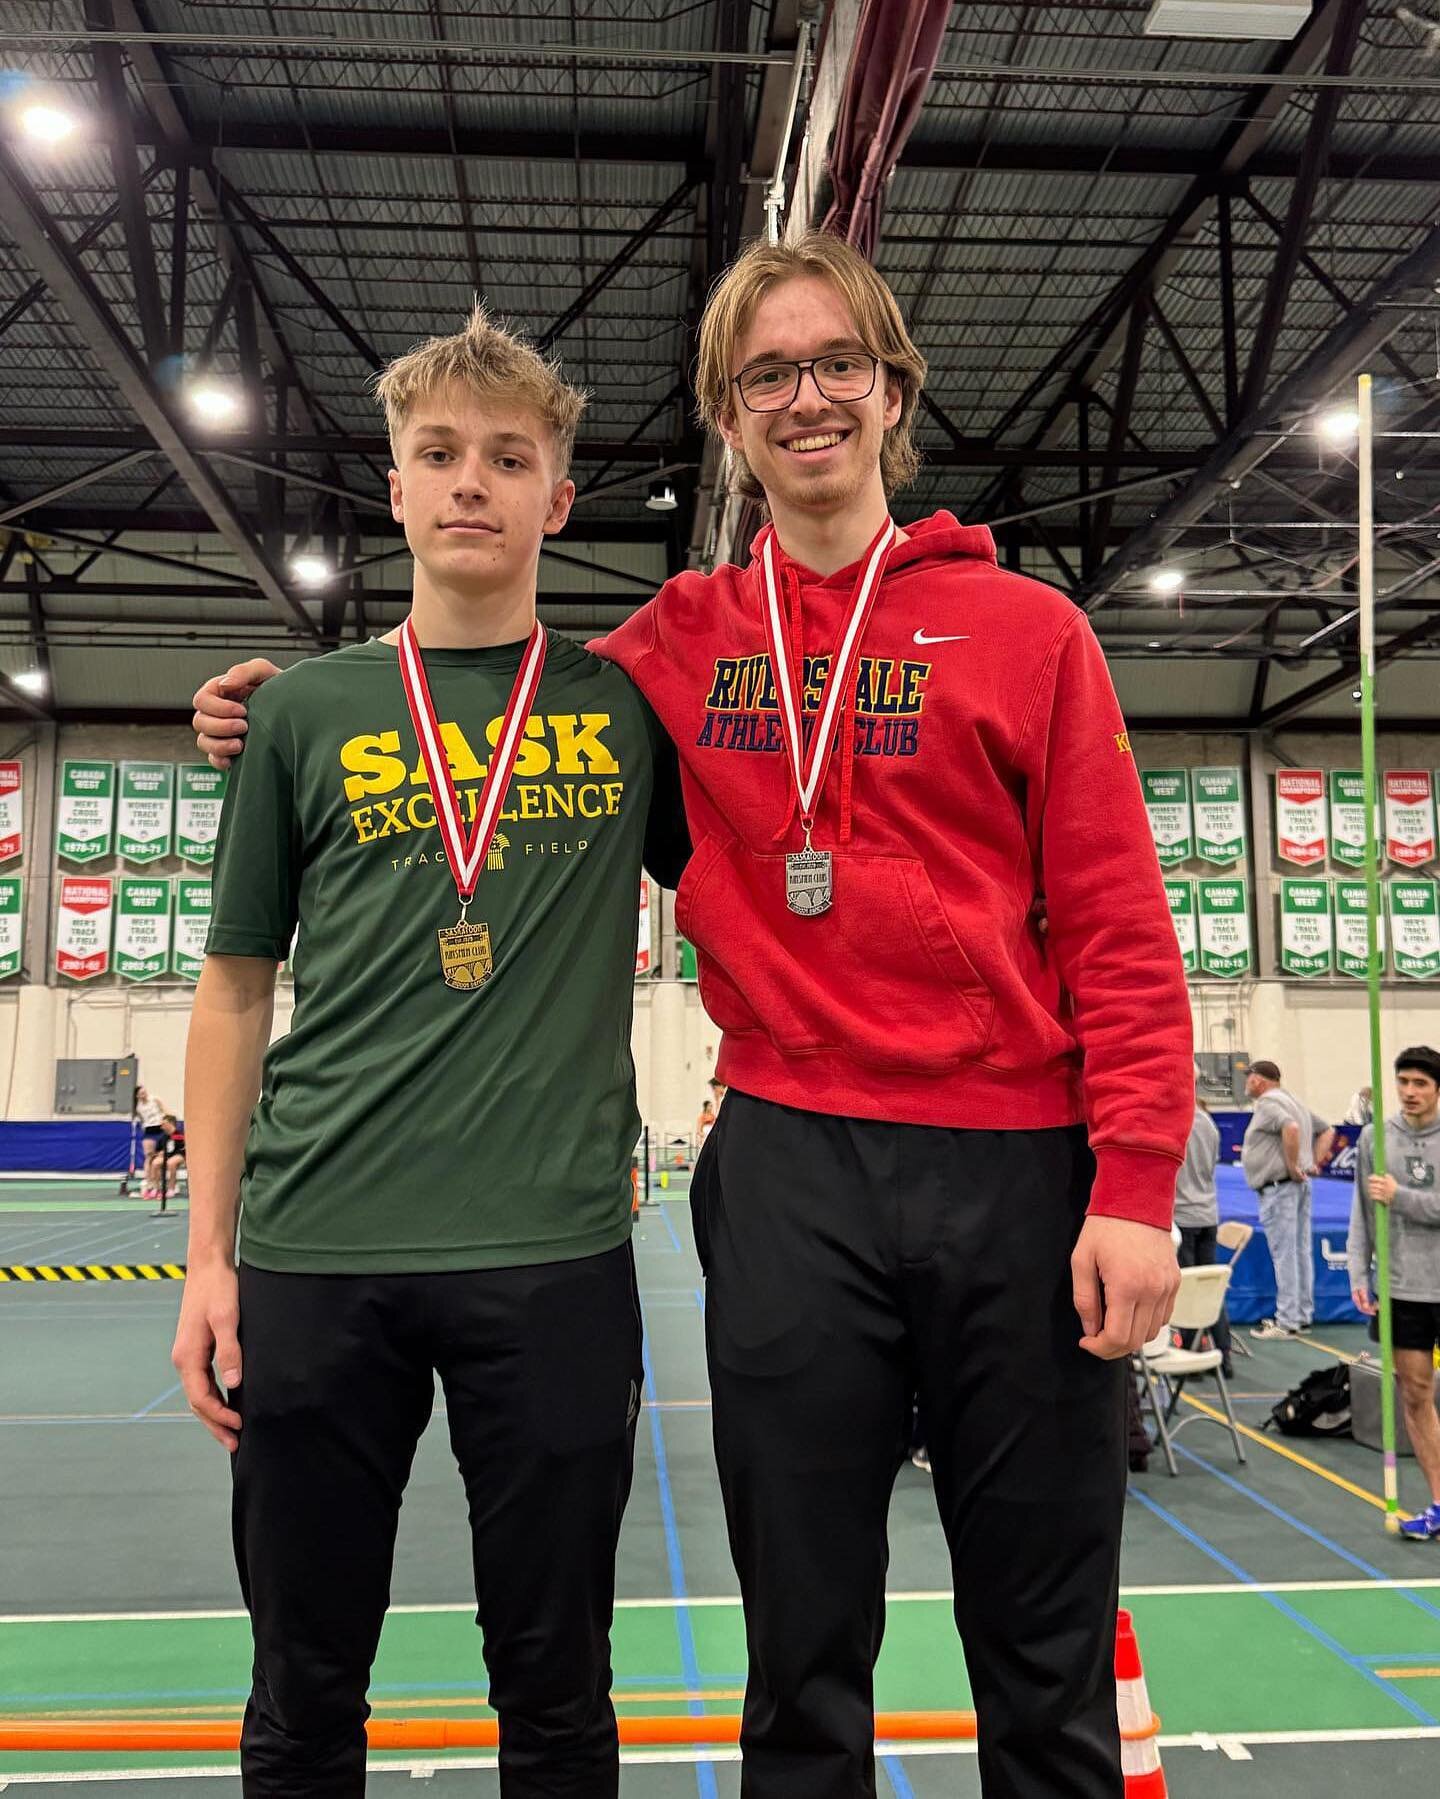 A few RIVA athlete highlights to share from this past weekend&rsquo;s Kinsmen Indoor Games:

Friends and teammates, Jackson King and Luke Schamber, had a battle in the U18 men&rsquo;s 60m Saturday afternoon. The officials had to go to the thousandth 